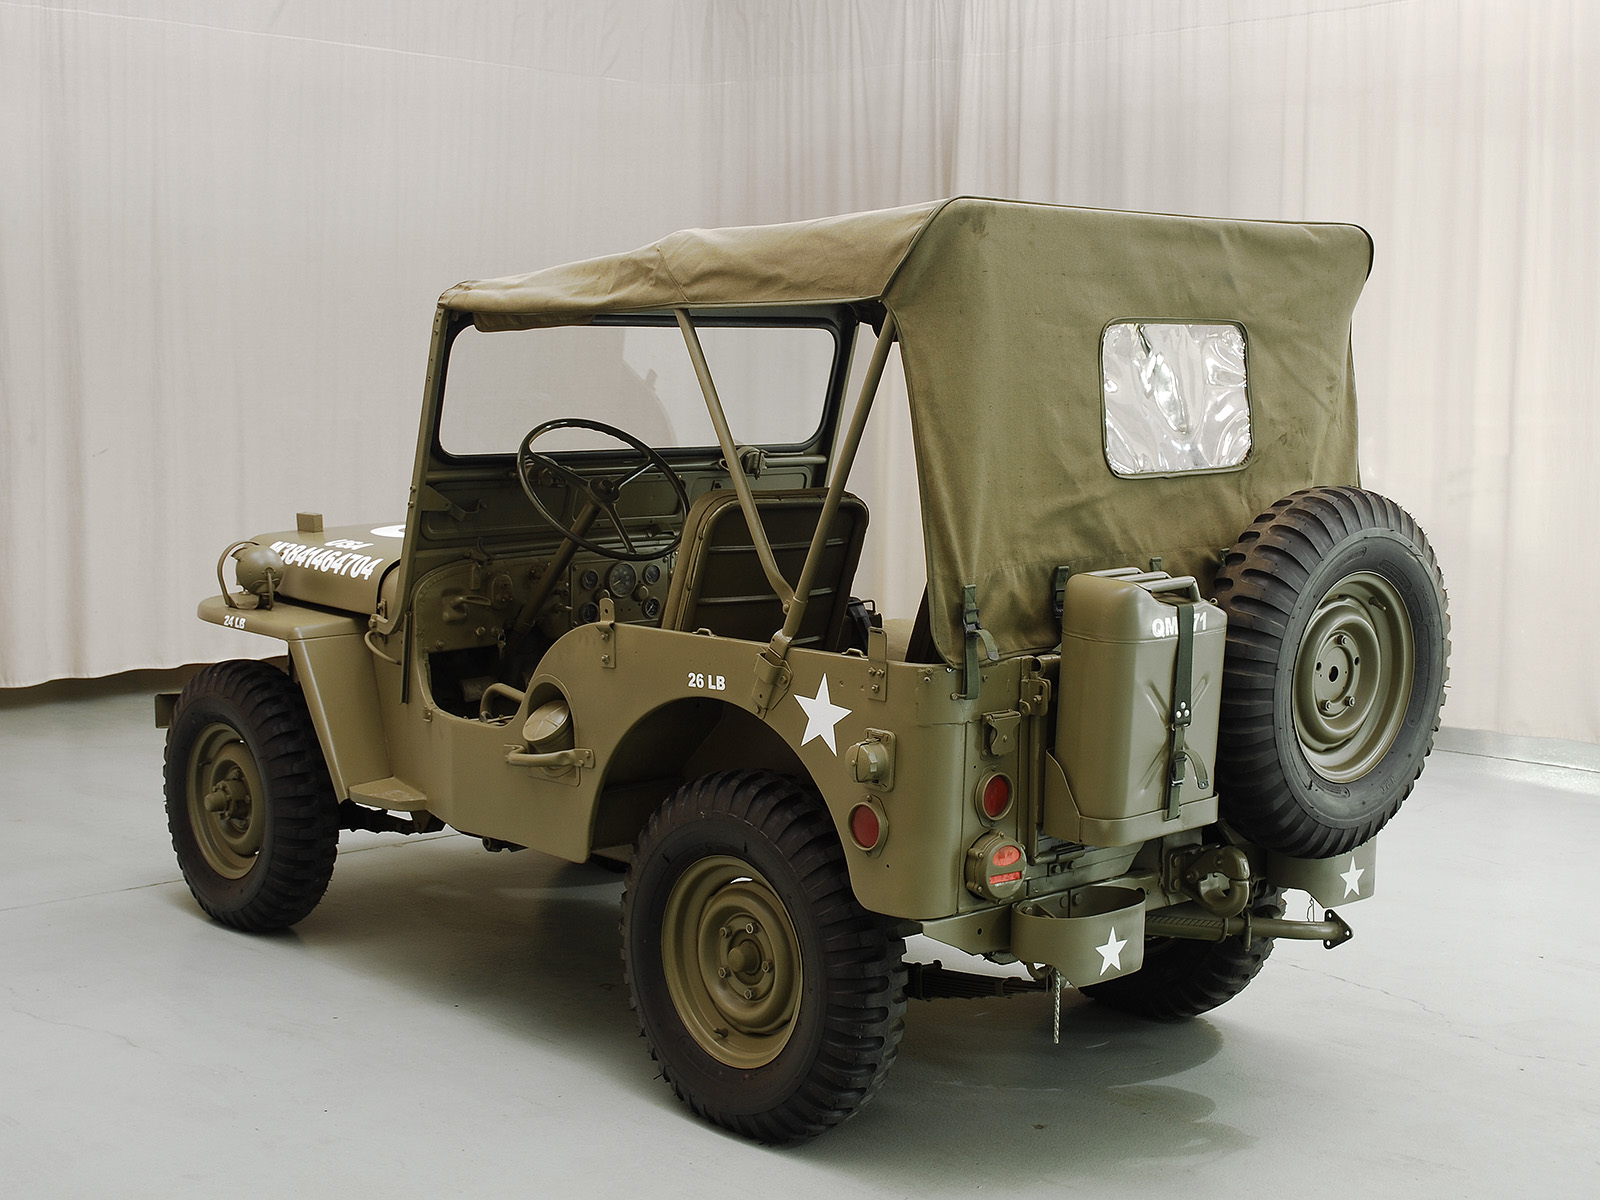 1951 willys-overland m38 1/4 ton